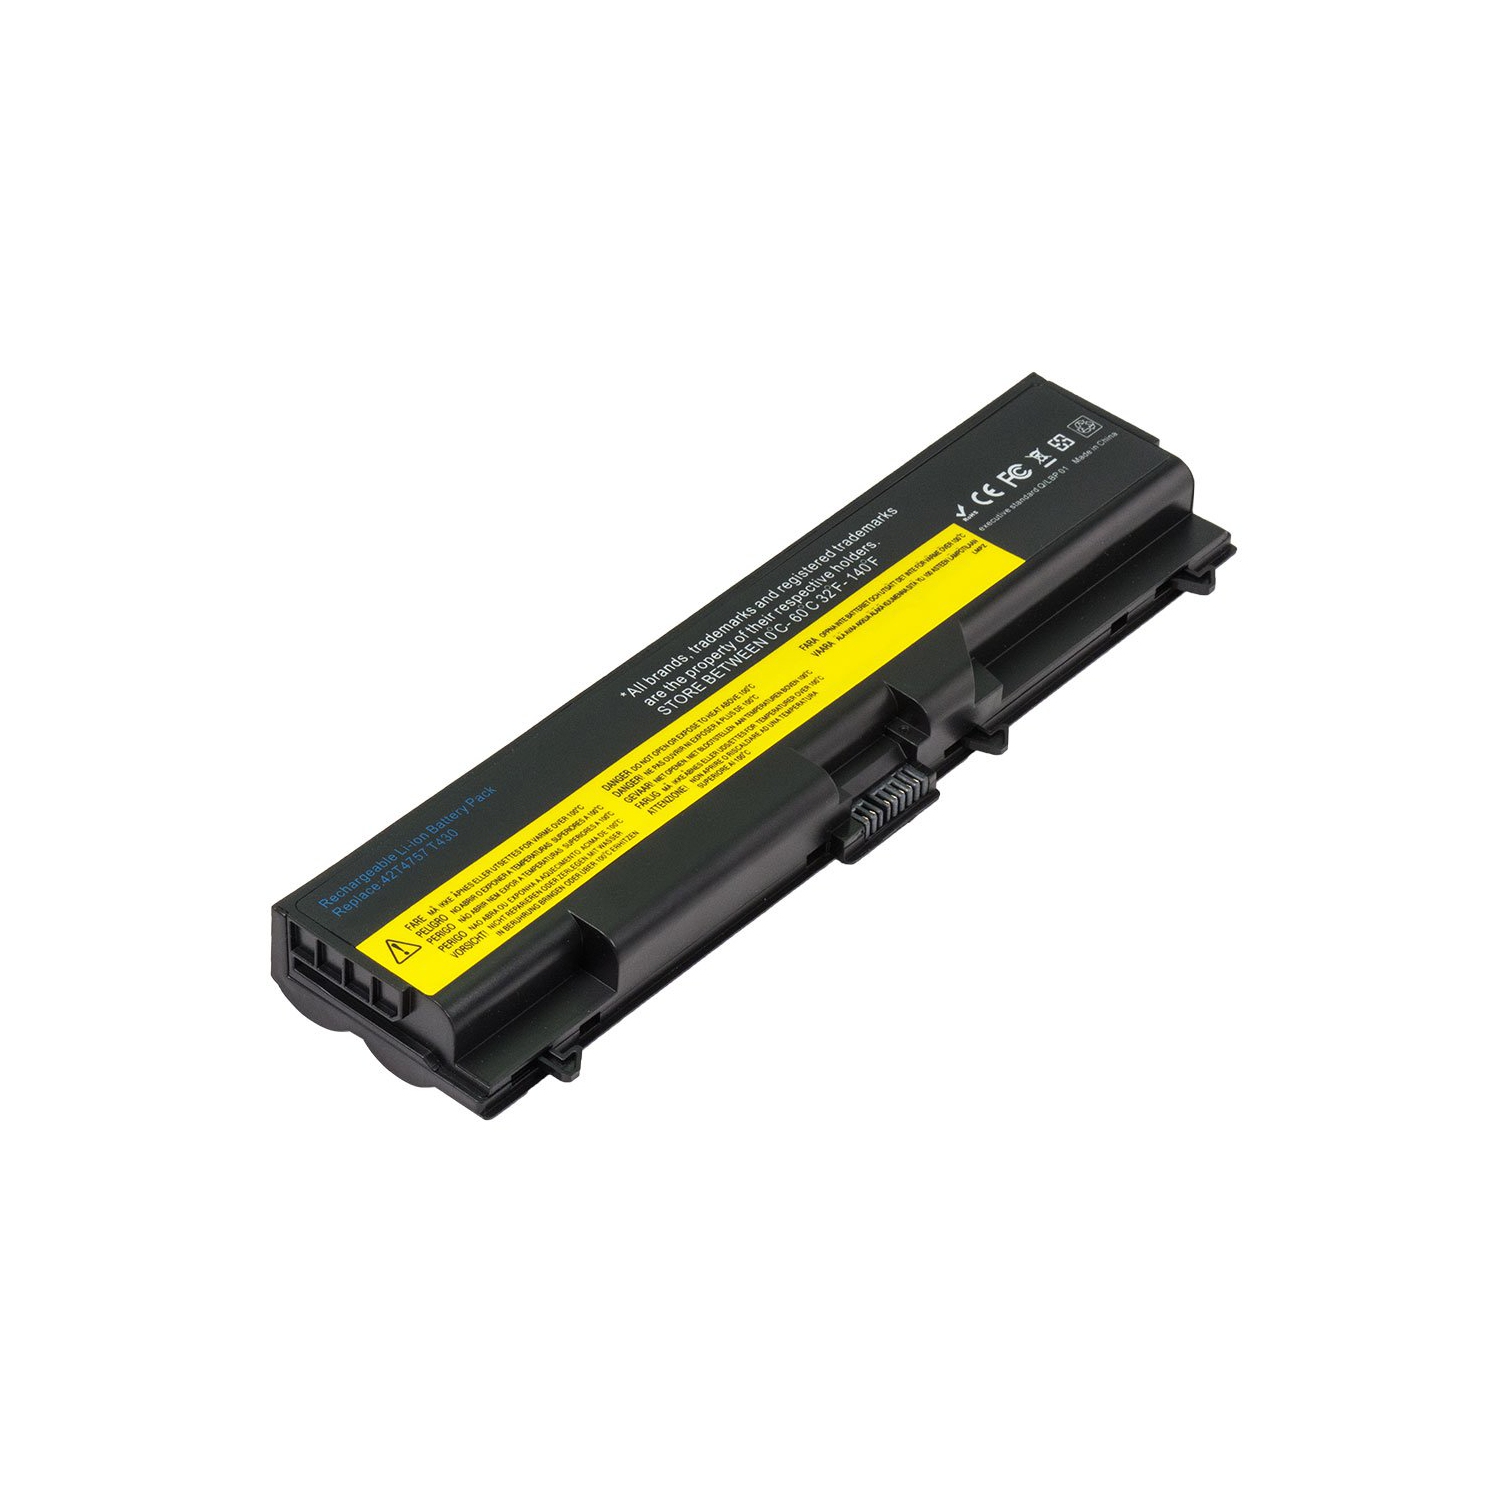 Laptop Battery Replacement for Lenovo ThinkPad W530 Series, 42T4712, 42T4737, 42T4763, 42T4797, 42T4921, 0A36303